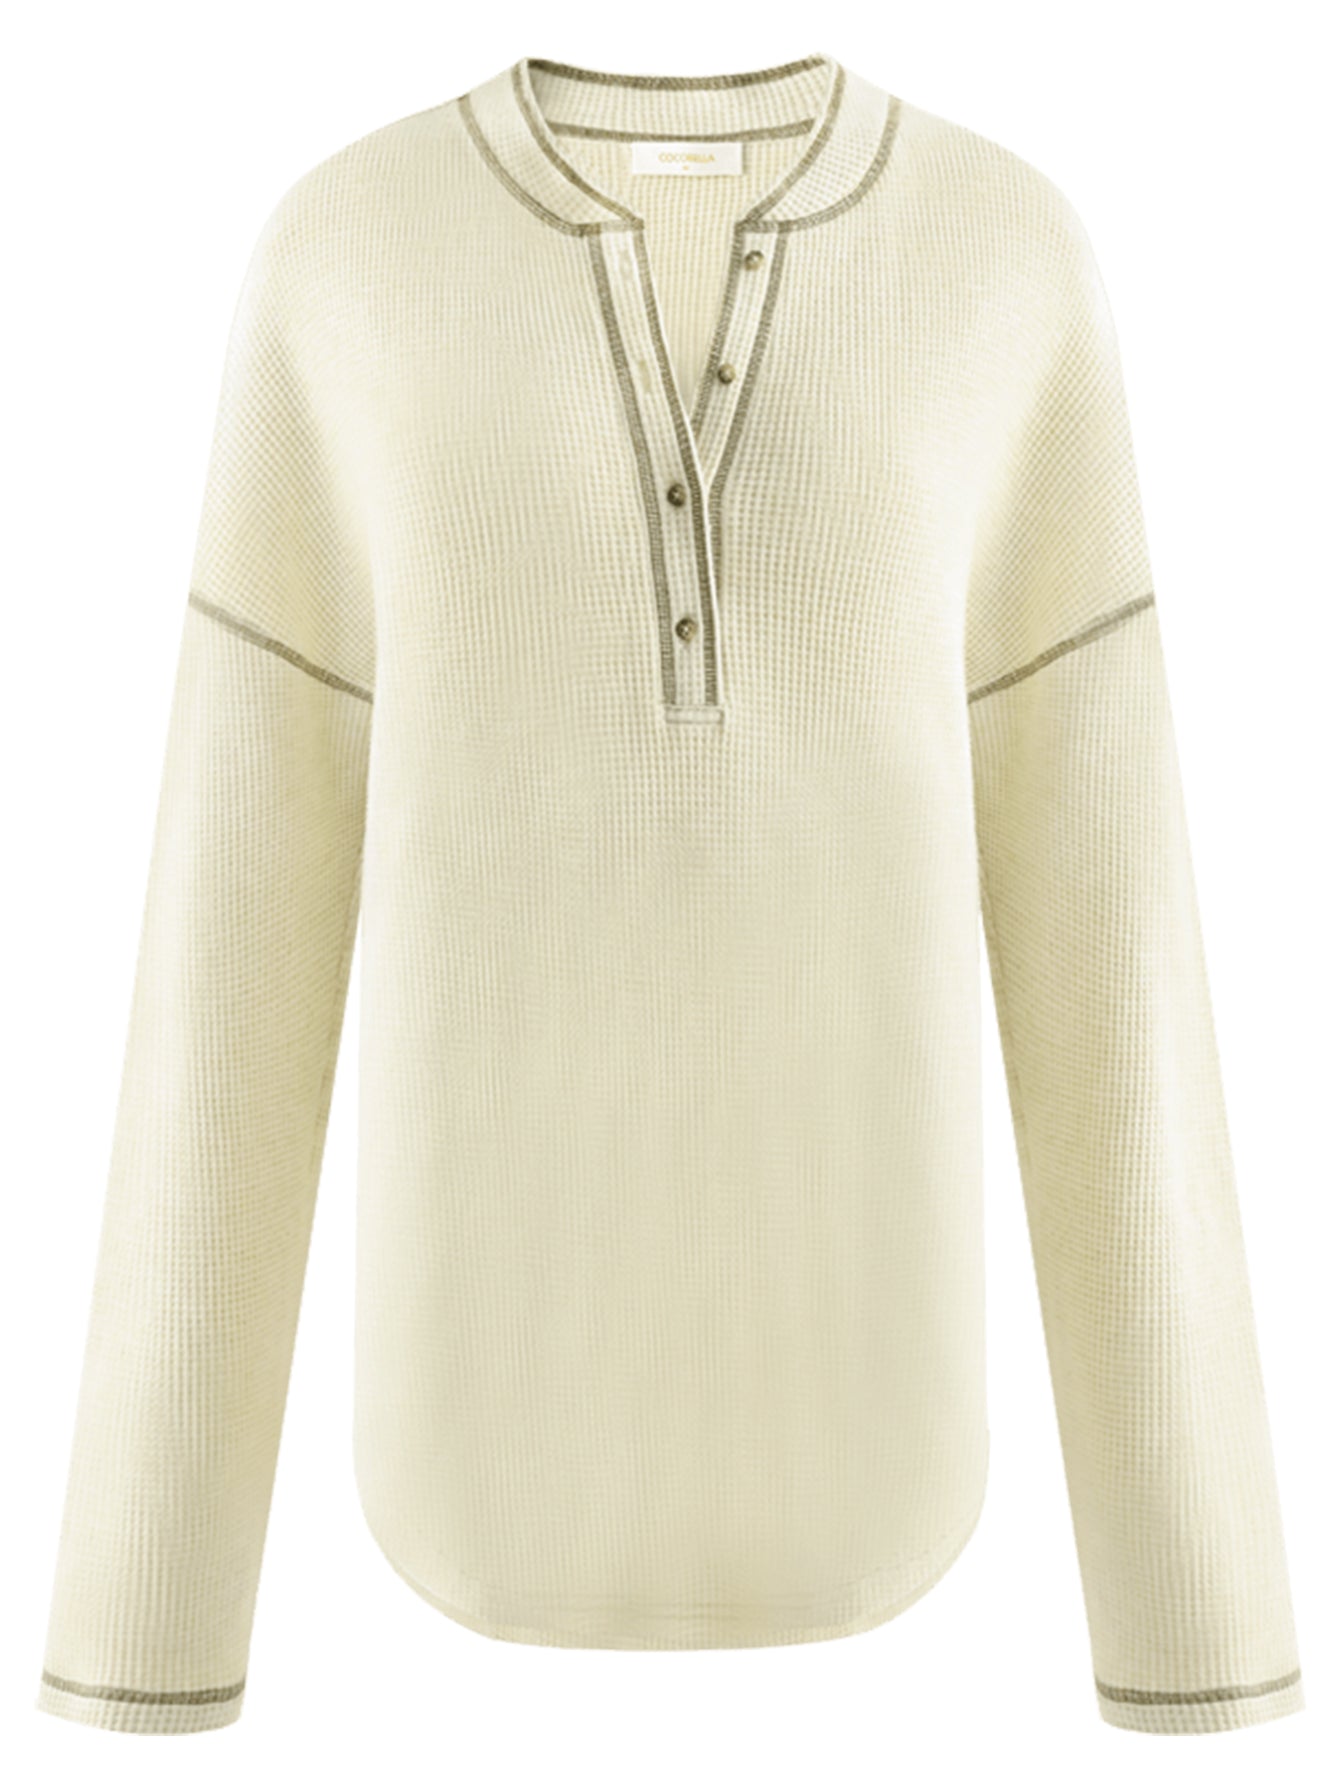 casual-cream-half-button-pullover-sweater-with-contrast-lined-details_all_cream_4.jpg